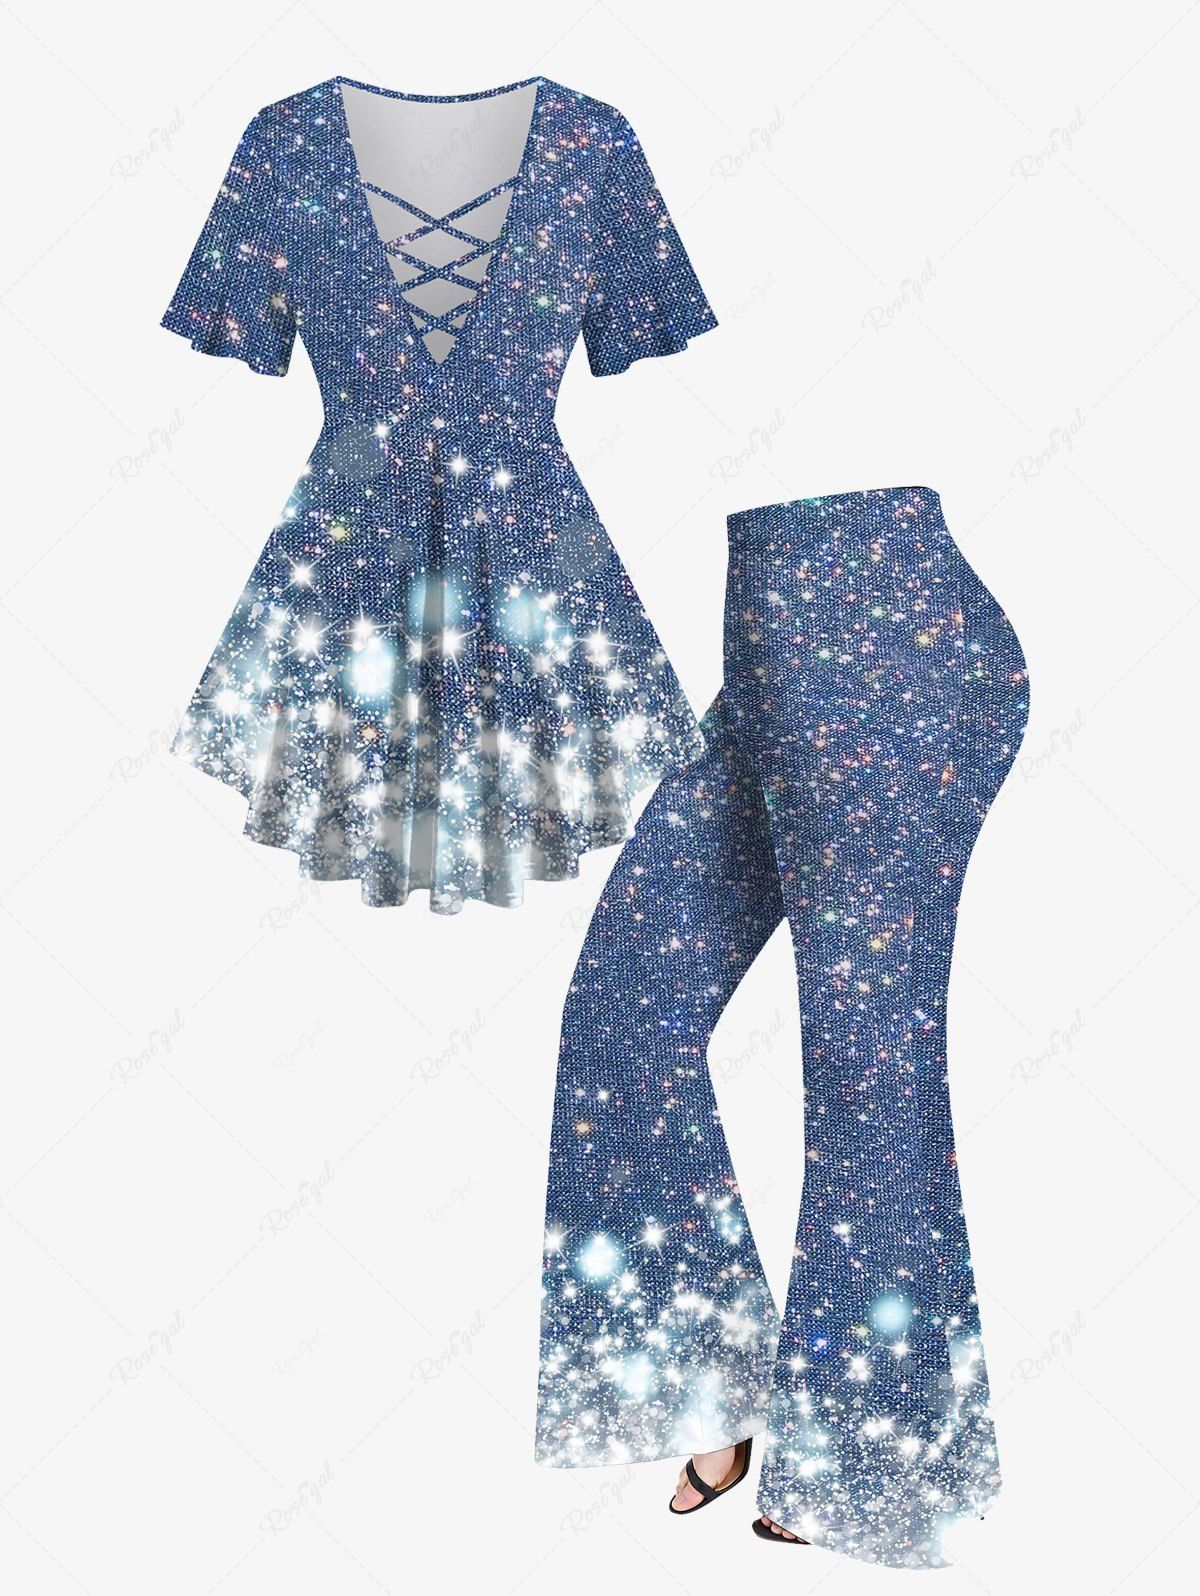 Sale Galaxy Sparkling Sequin Glitter Jeans 3D Printed Lattice Crisscross Flare Sleeve T-shirt And Flare Pants Plus Size 70s 80s Outfit  